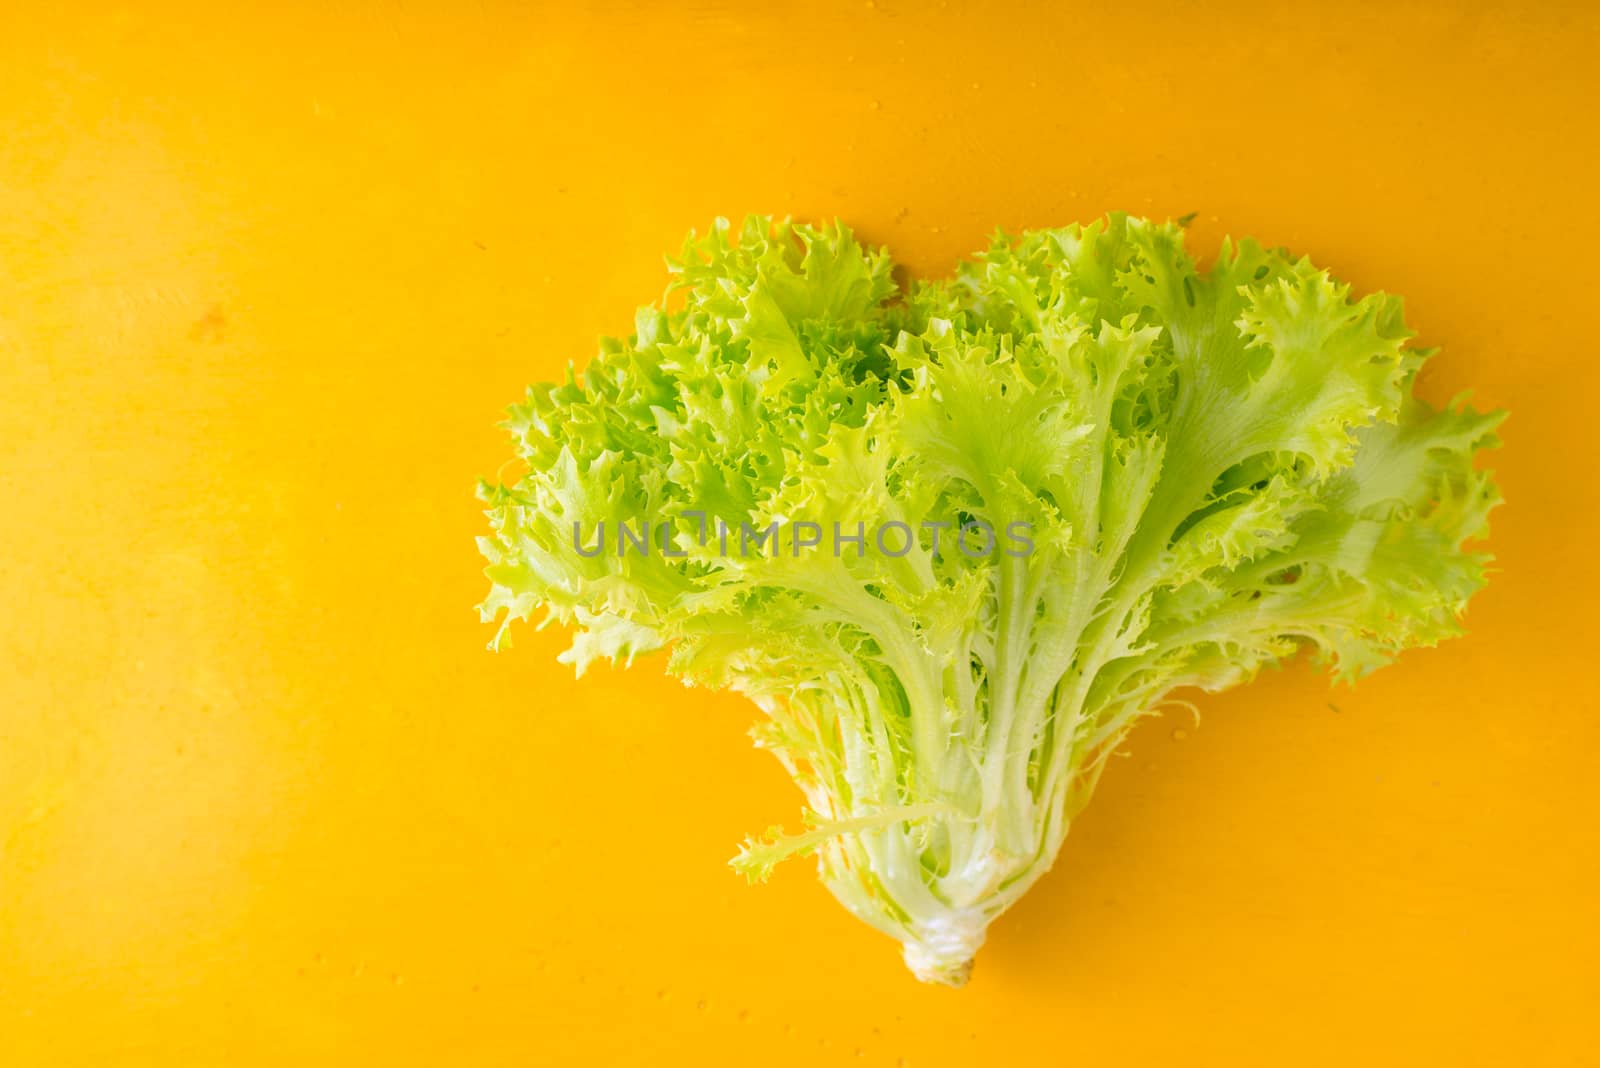 Leafy green salad on a yellow table horizontal